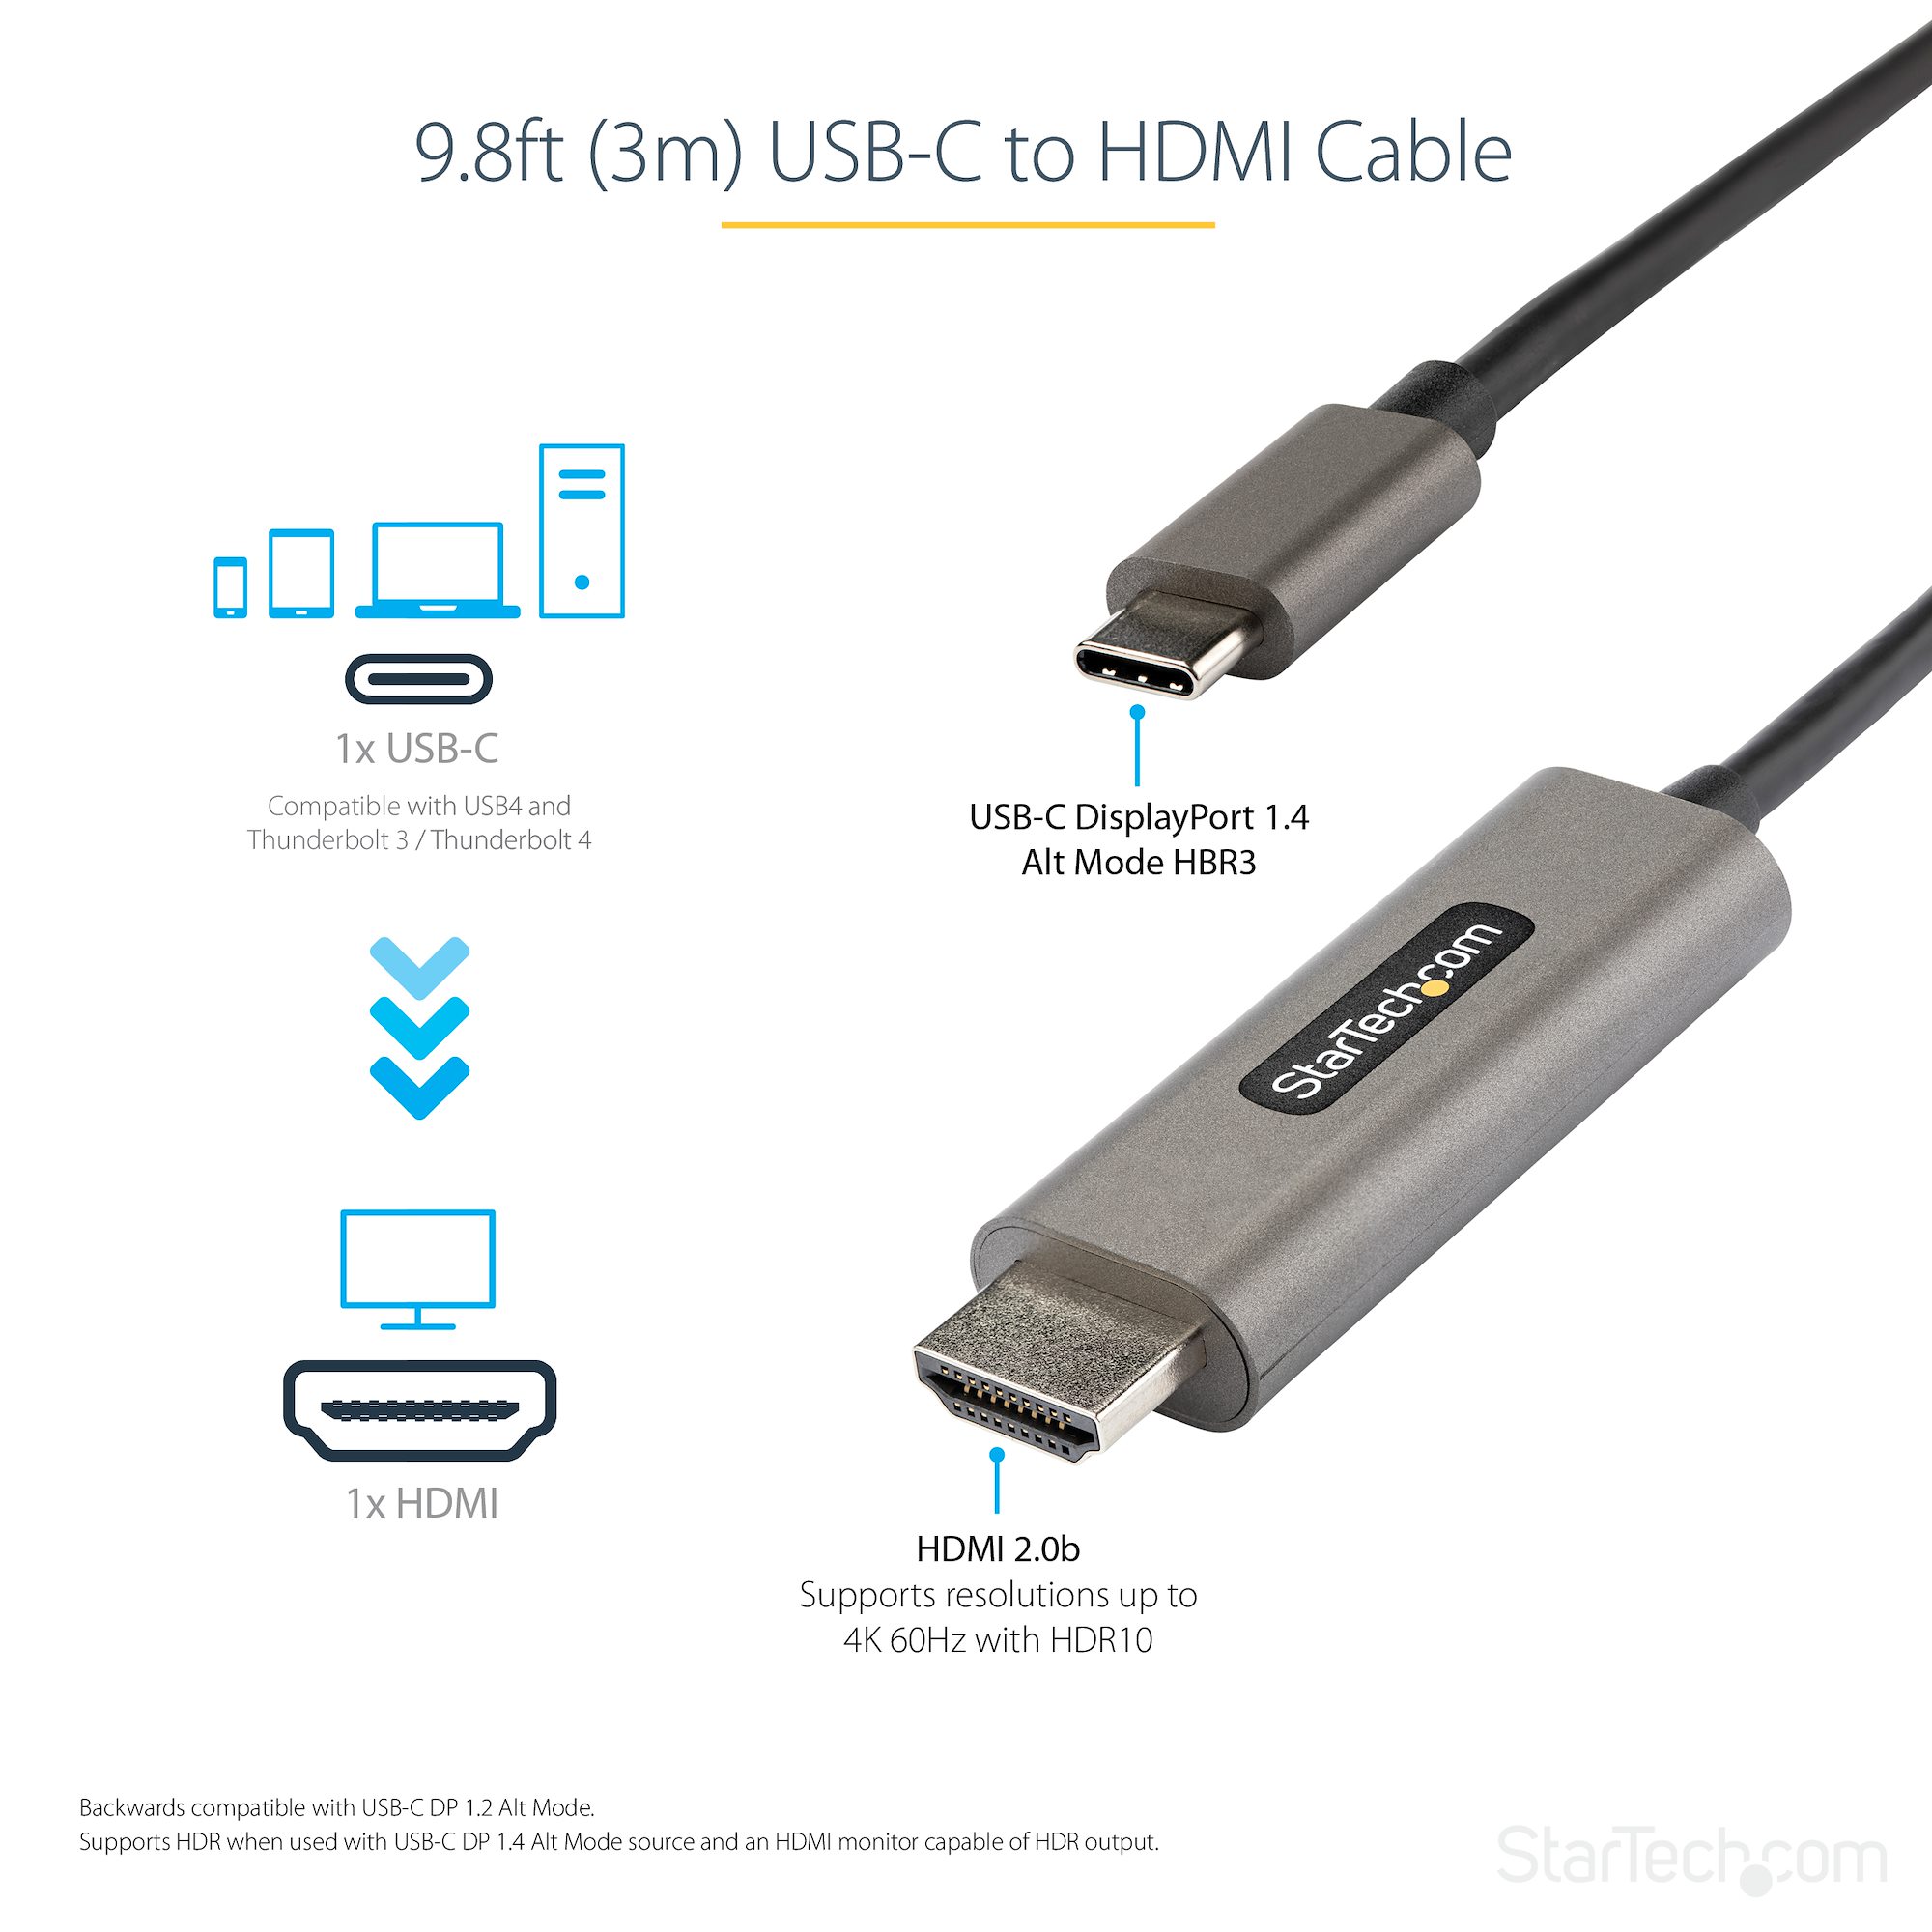  StarTech.com 3m (10ft) HDMI Cable - 4K High Speed HDMI